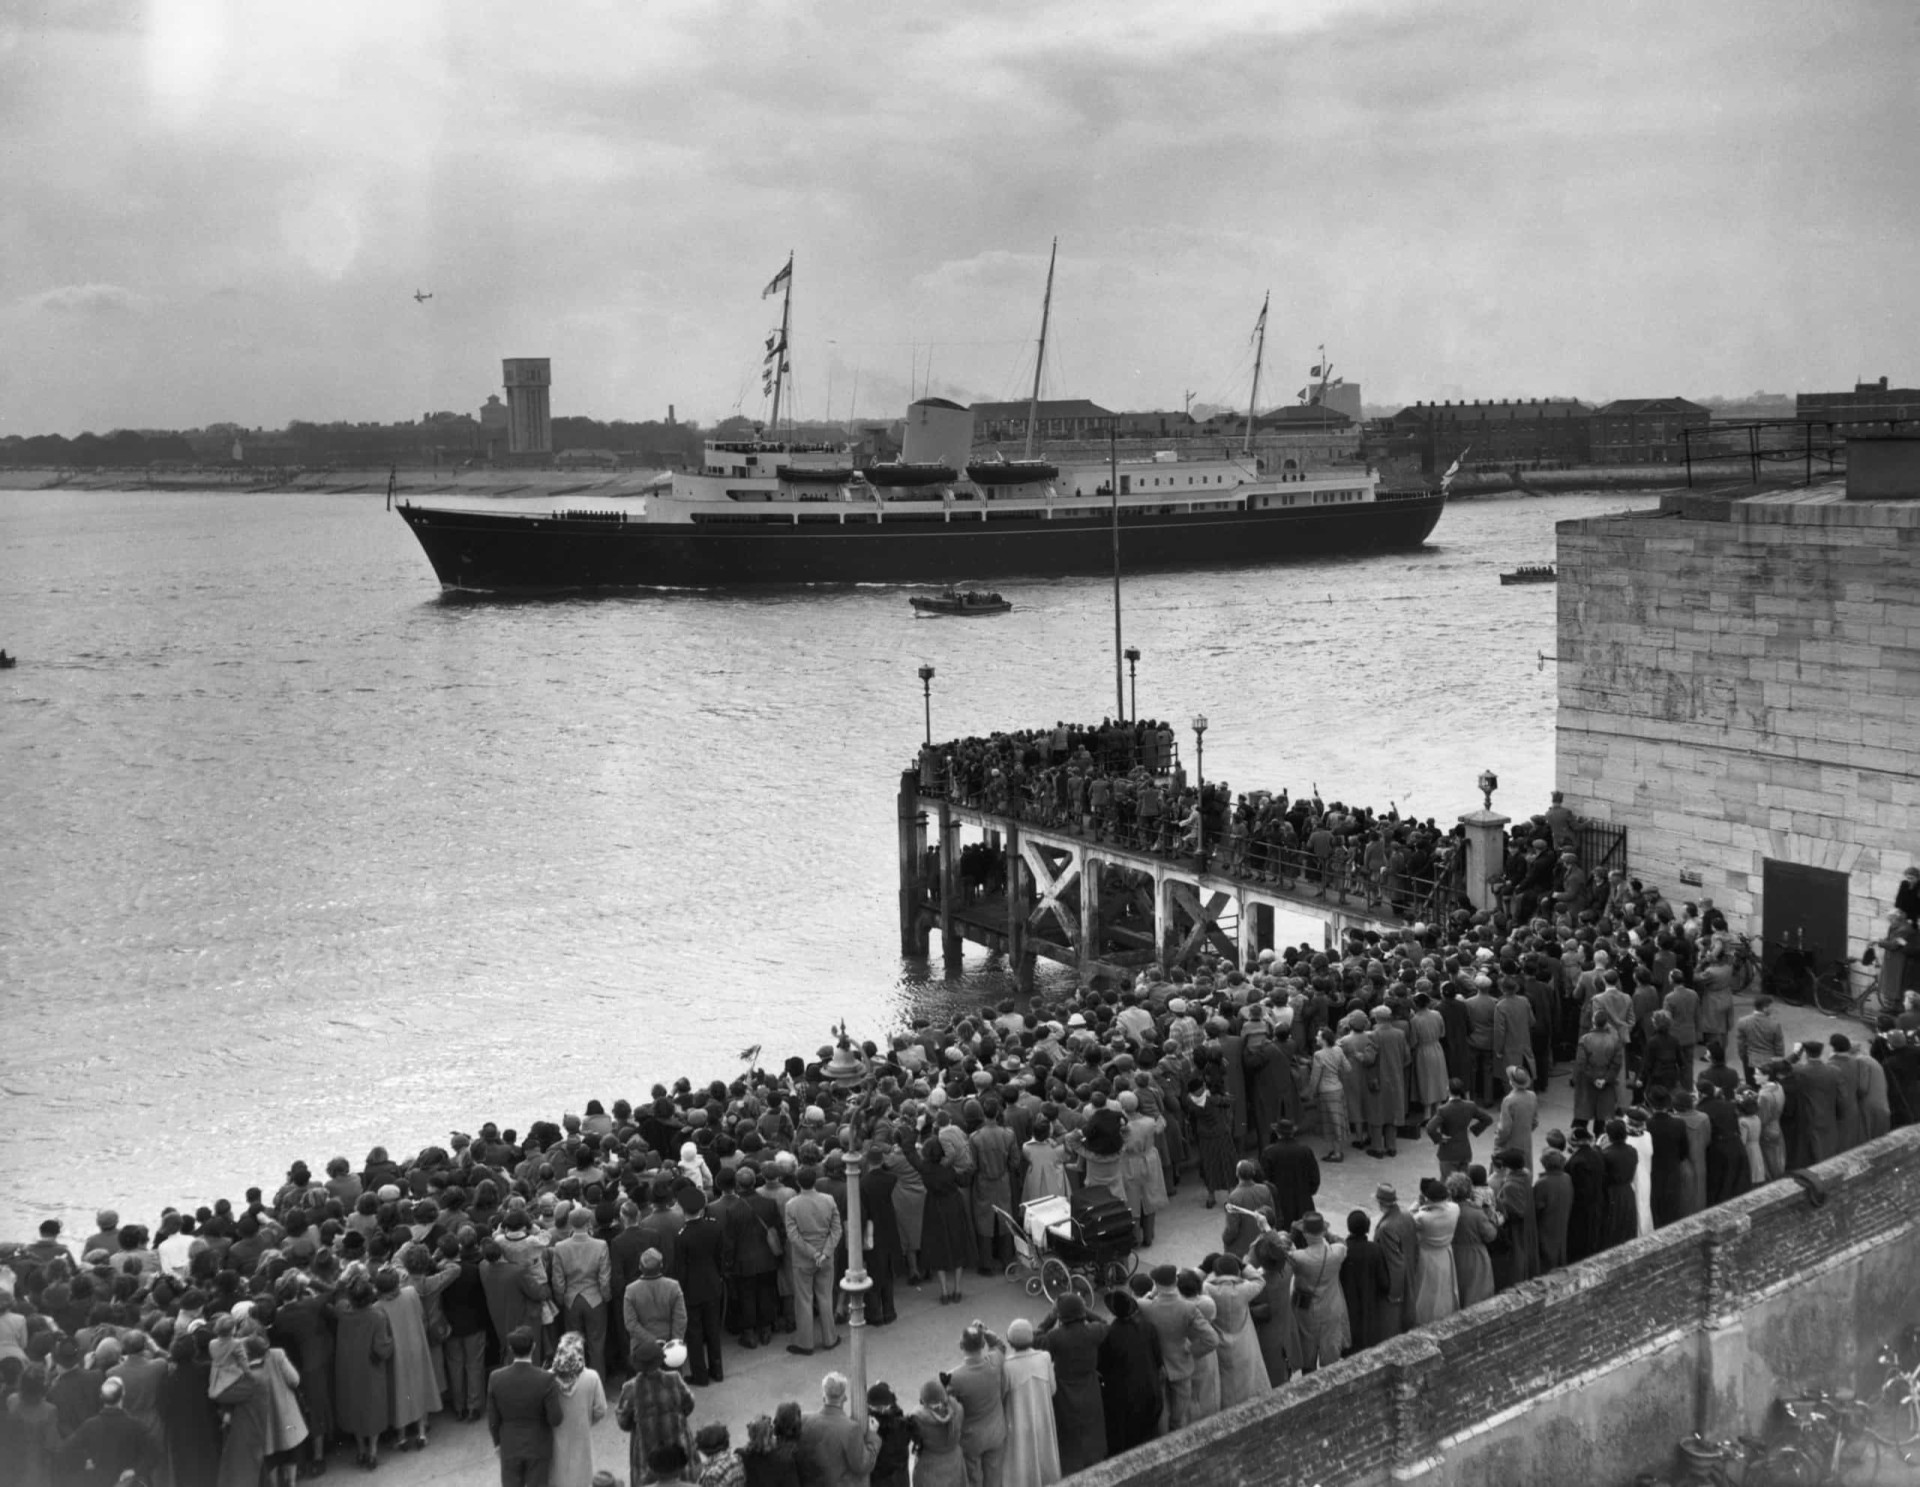 <p>A crowd gathers to bid the Royal Yacht <em>Britannia</em> farewell upon her departure from Portsmouth, England, on April 14, 1954 on her maiden voyage to Malta. The vessel was ultimately bound for Tobruk, in Libya.</p><p><a href="https://www.msn.com/en-sg/community/channel/vid-7xx8mnucu55yw63we9va2gwr7uihbxwc68fxqp25x6tg4ftibpra?cvid=94631541bc0f4f89bfd59158d696ad7e">Follow us and access great exclusive content every day</a></p>